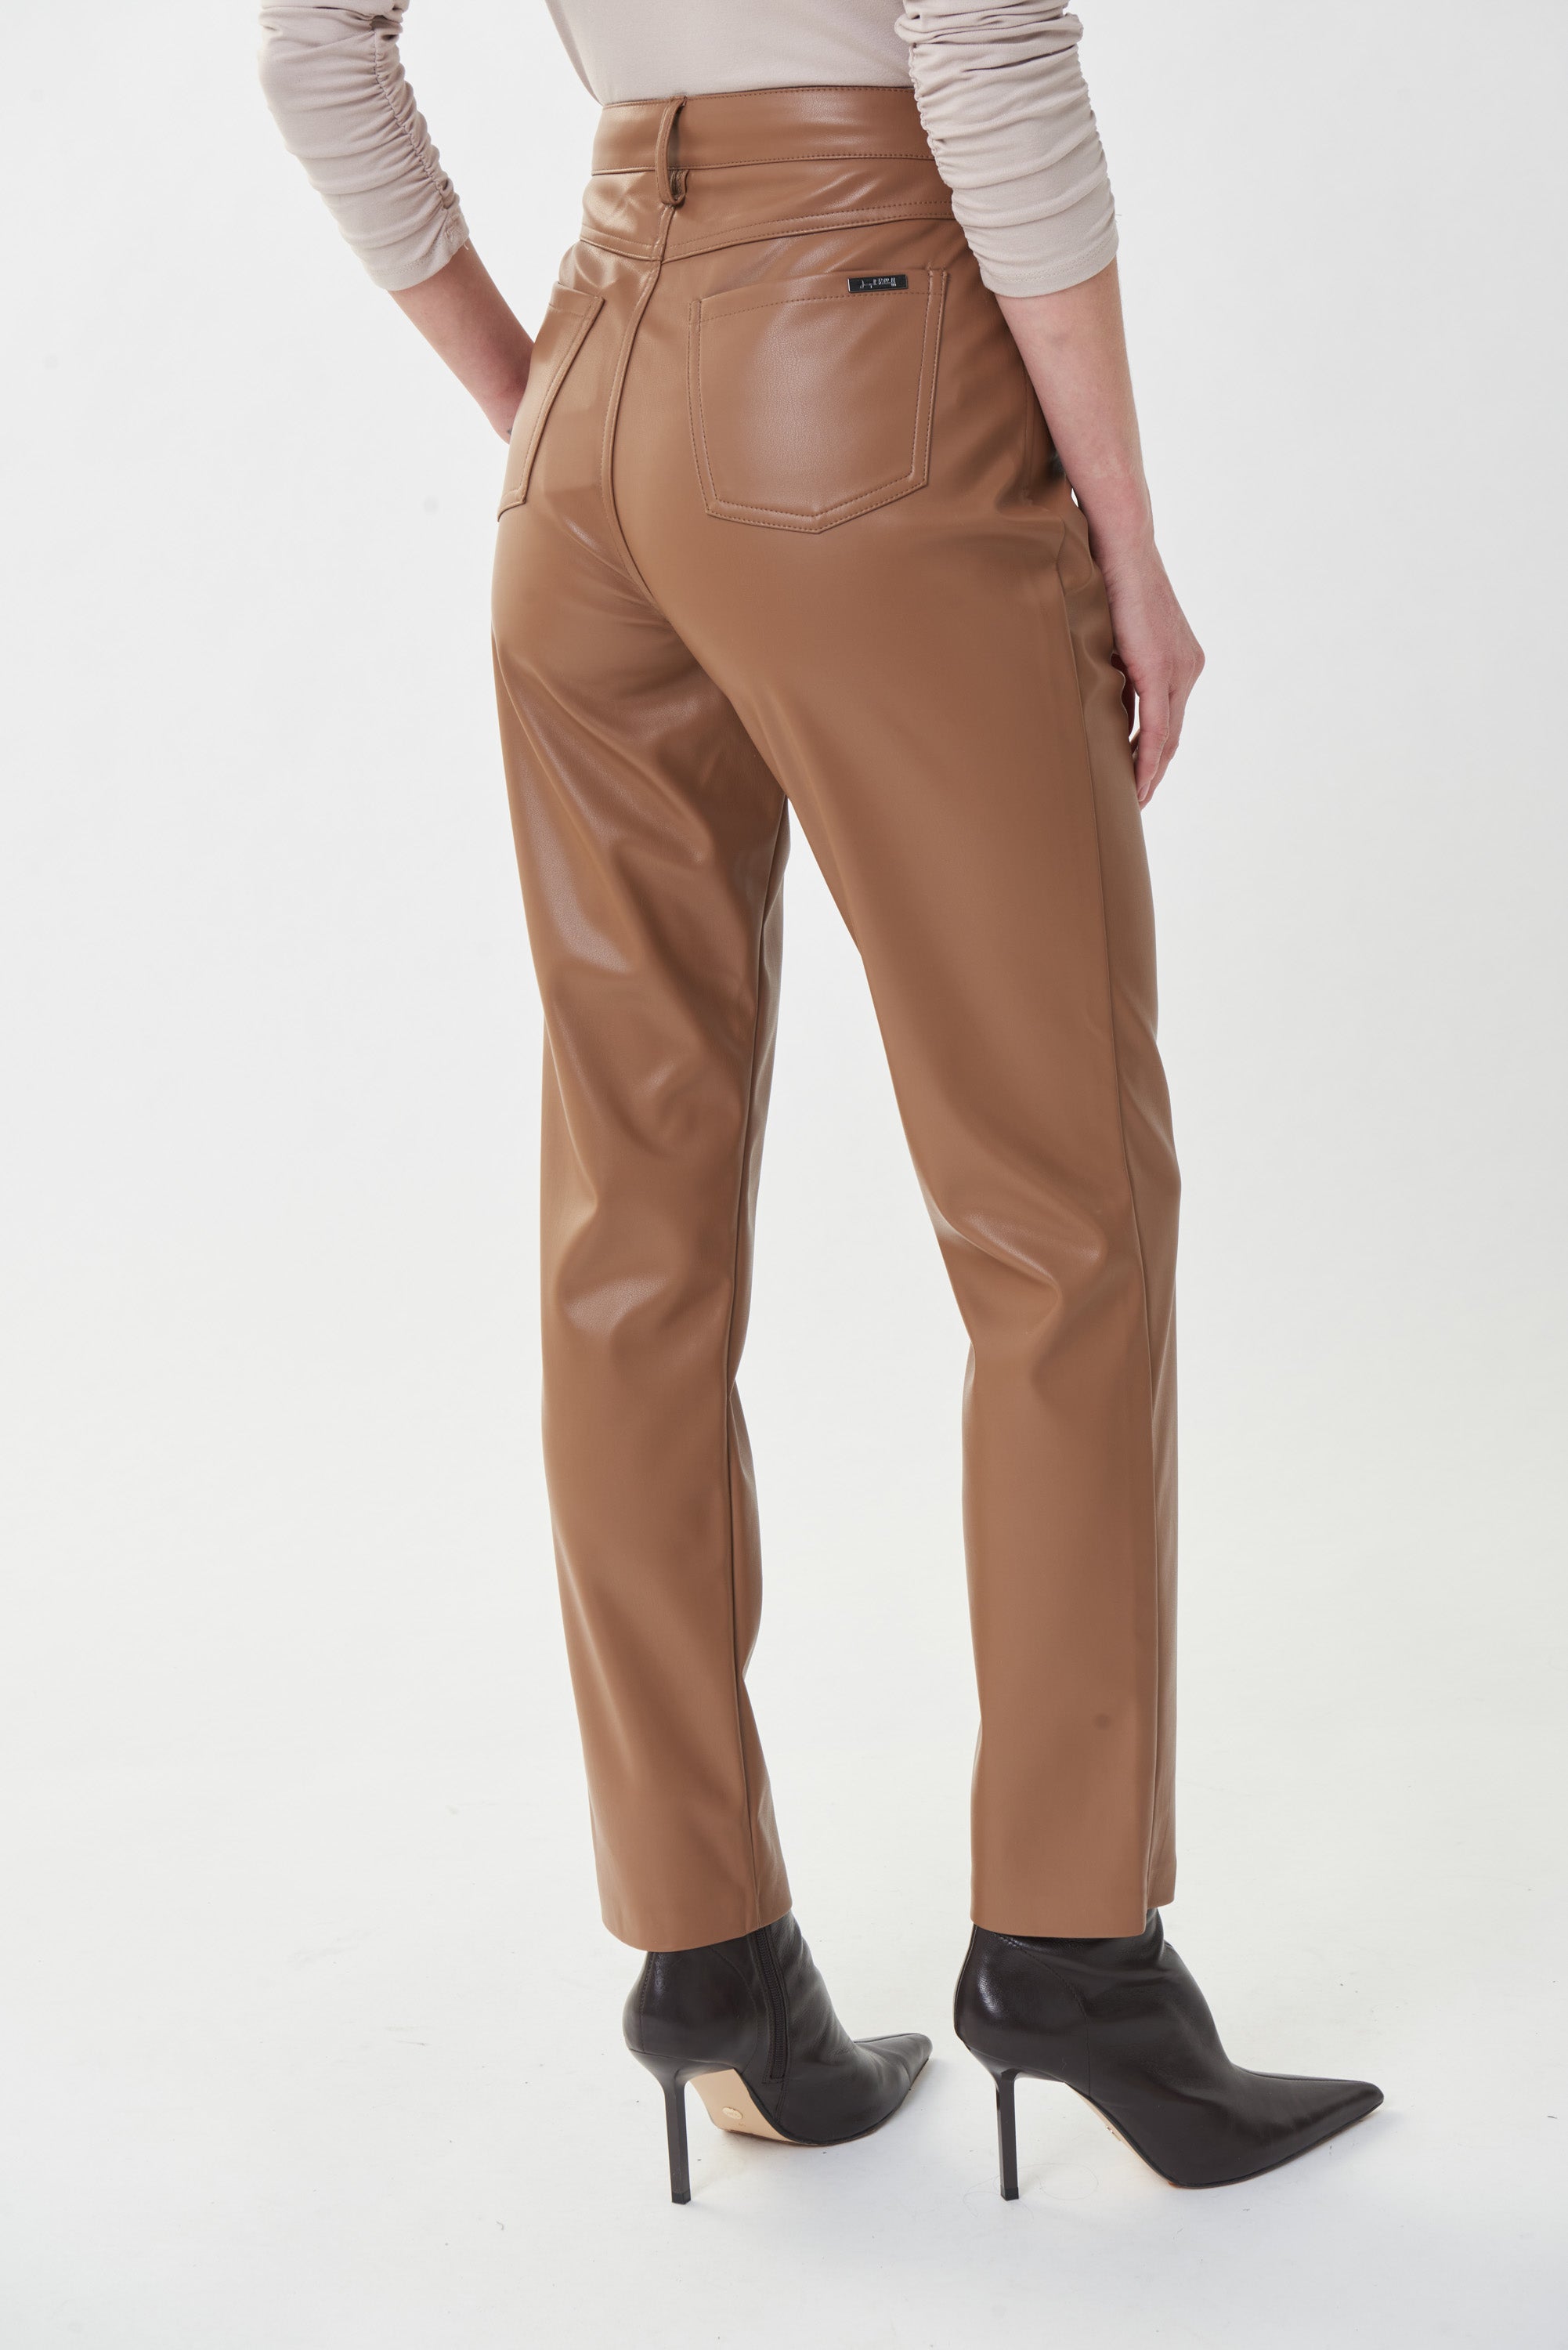 Make a stylish statement with these Pleather Pants from Joseph Ribkoff! These are cut in a denim-style design with belt loops, a button and zip fly, and fully functional front and back pockets. 